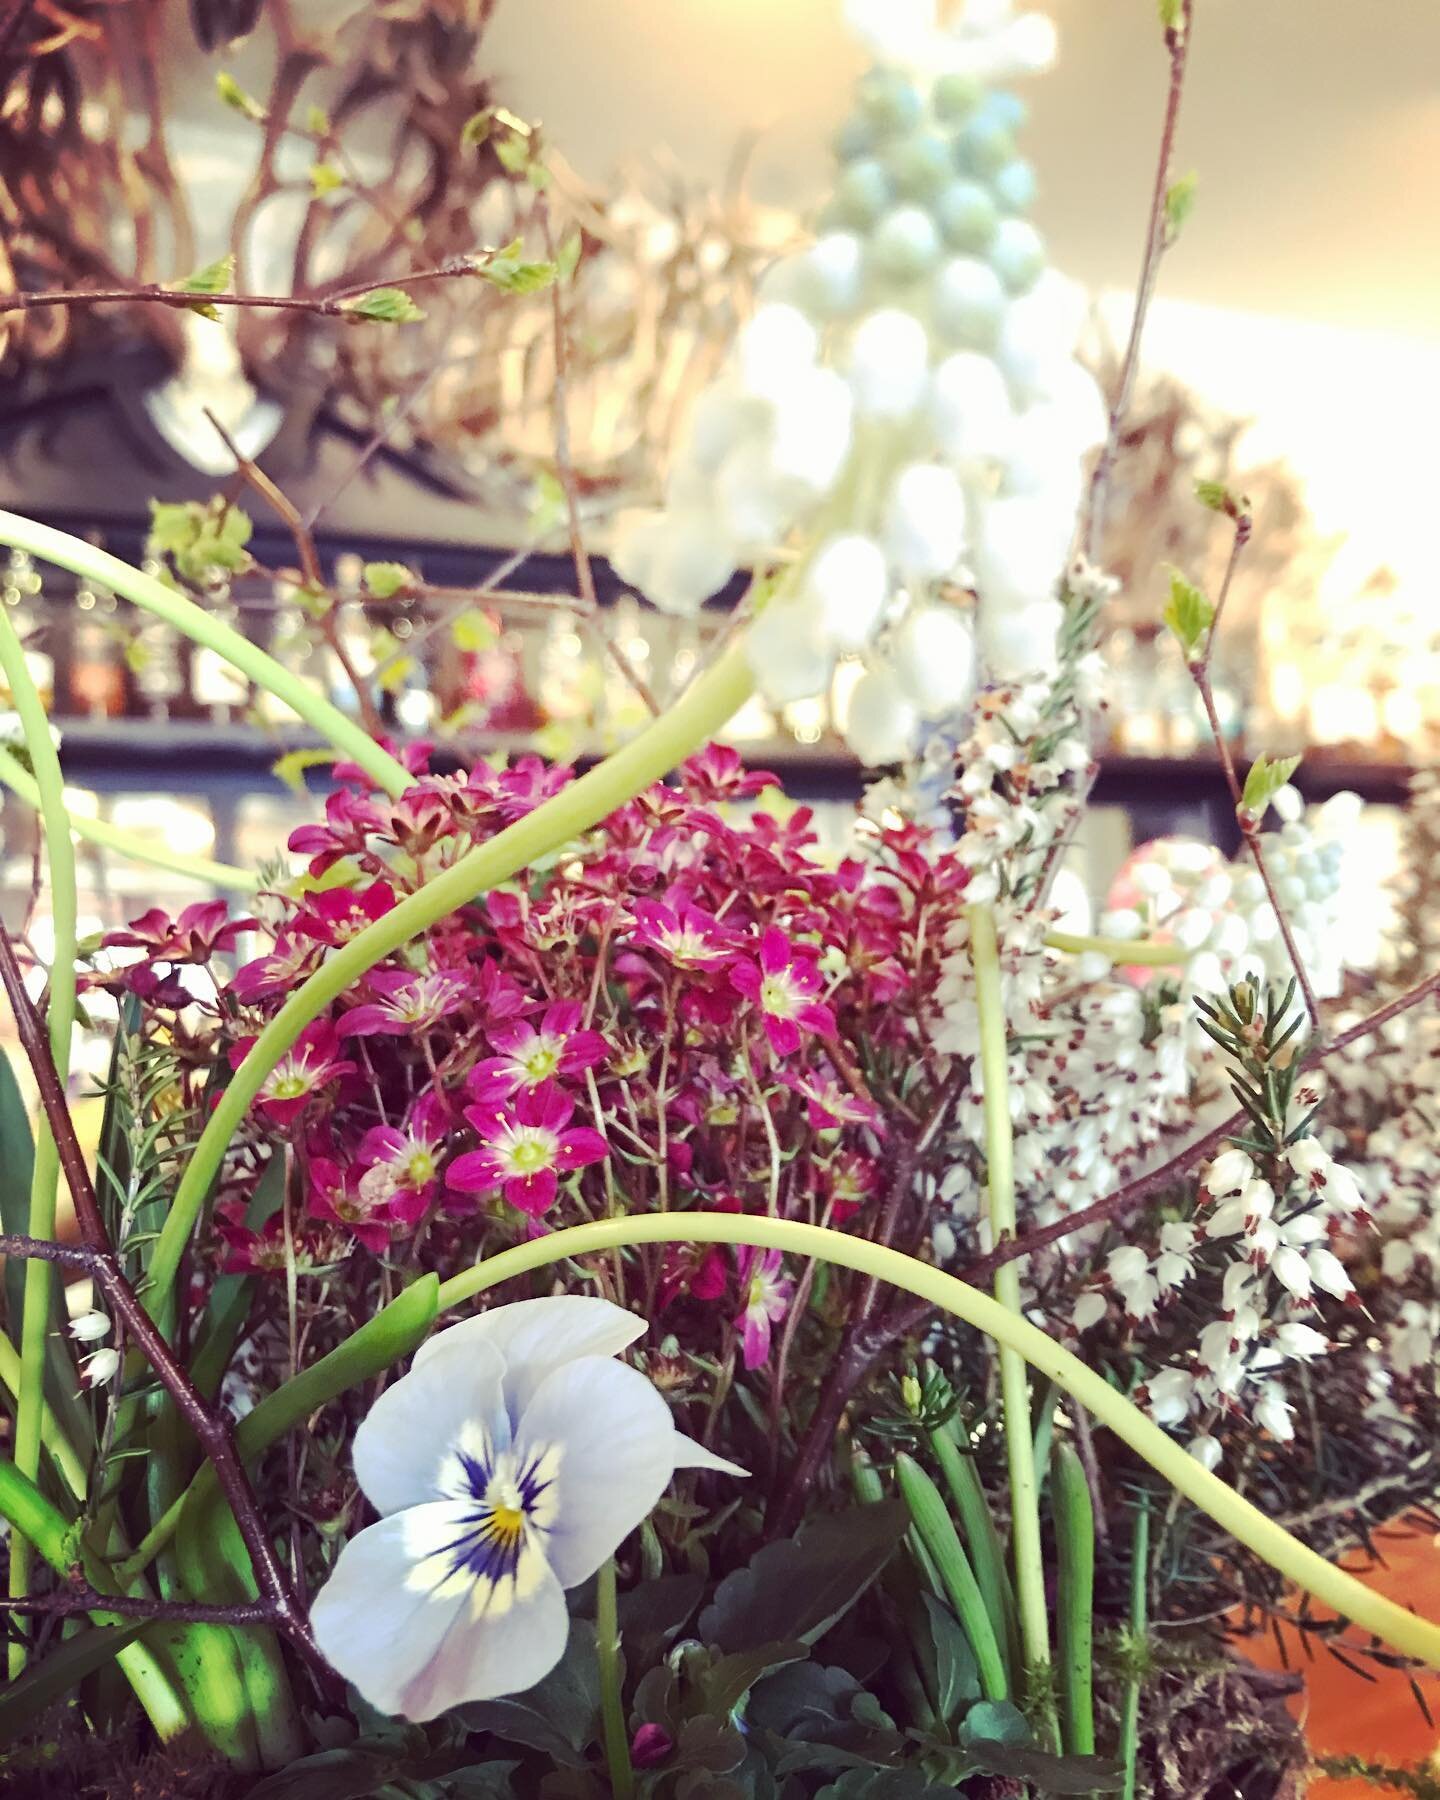 Flying the flag in the flying stag this weekend &hellip; for Scottish and British grown plants and flowers! Sweet and scented flowers grown nearby, with living birch trees and put together by your friendly neighbourhood florist! Support small busines